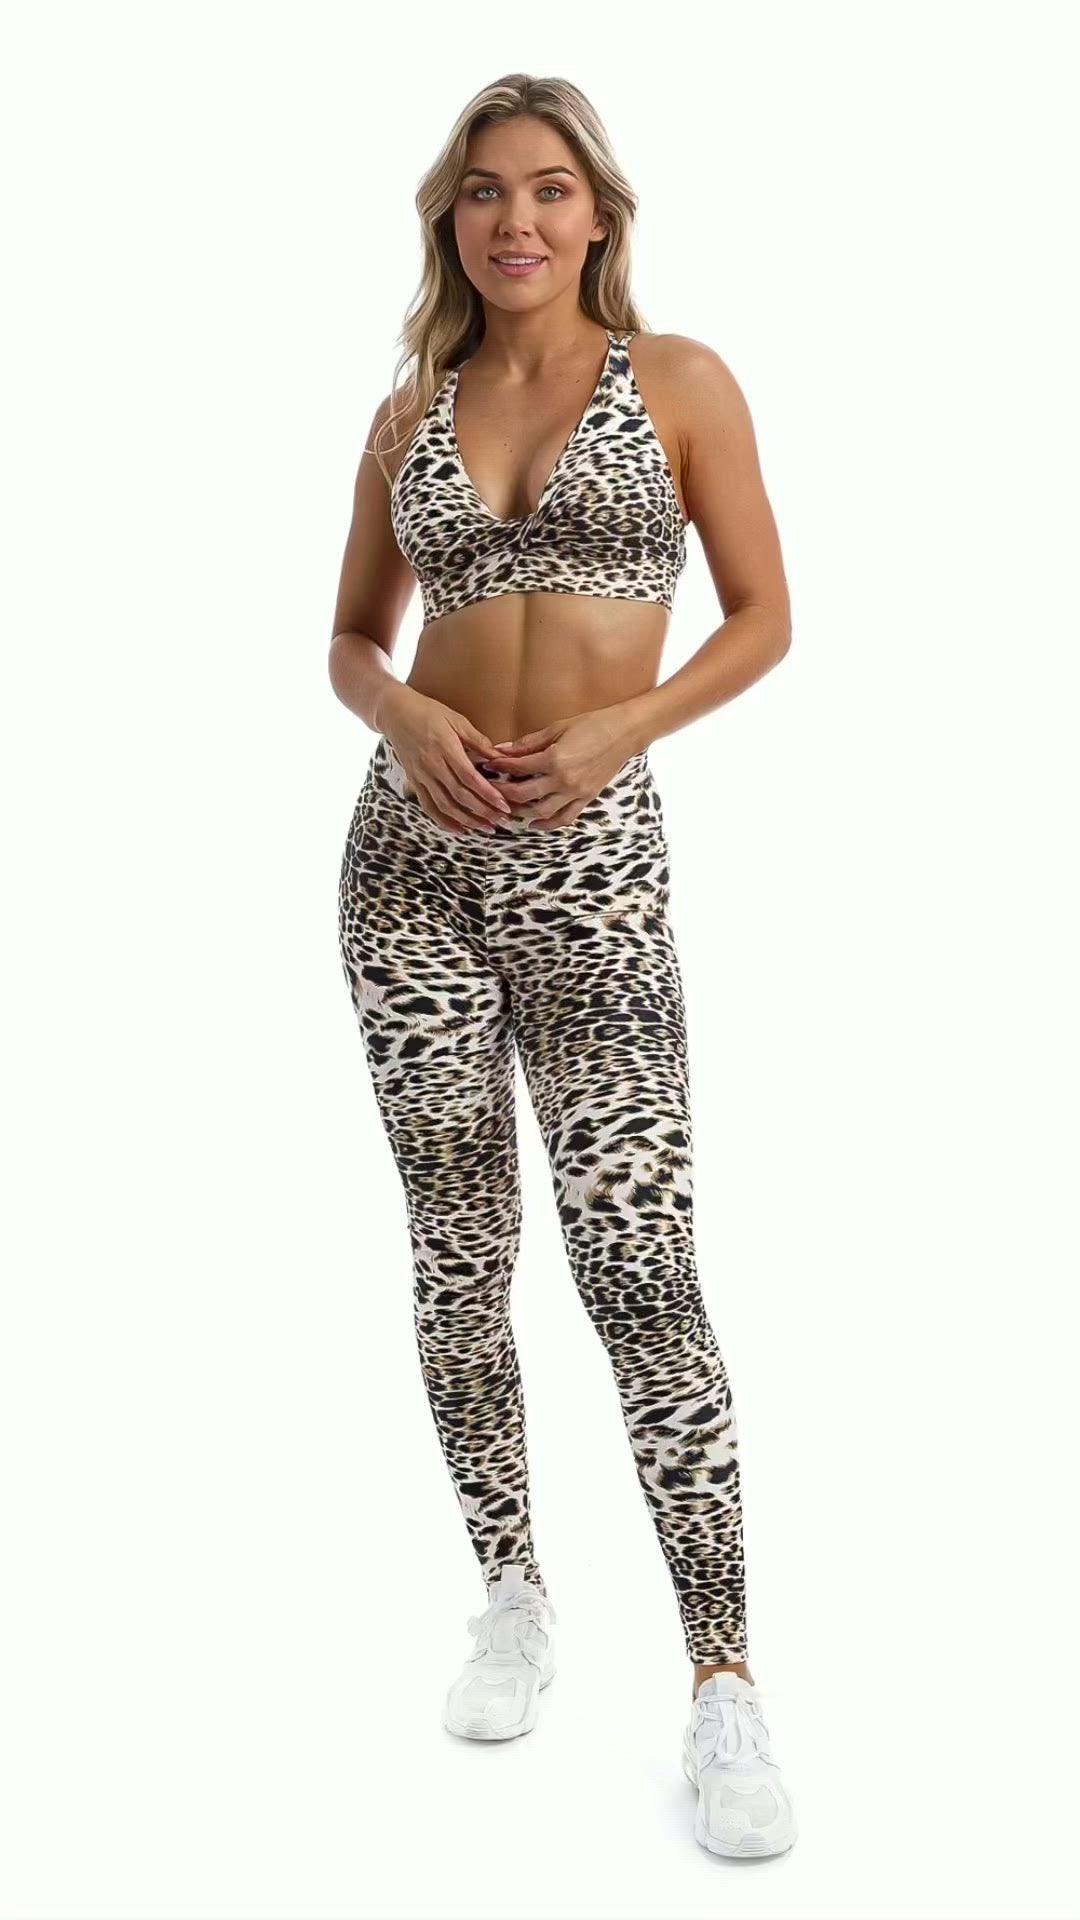 Video of girl wearing brown & white cheetah print products